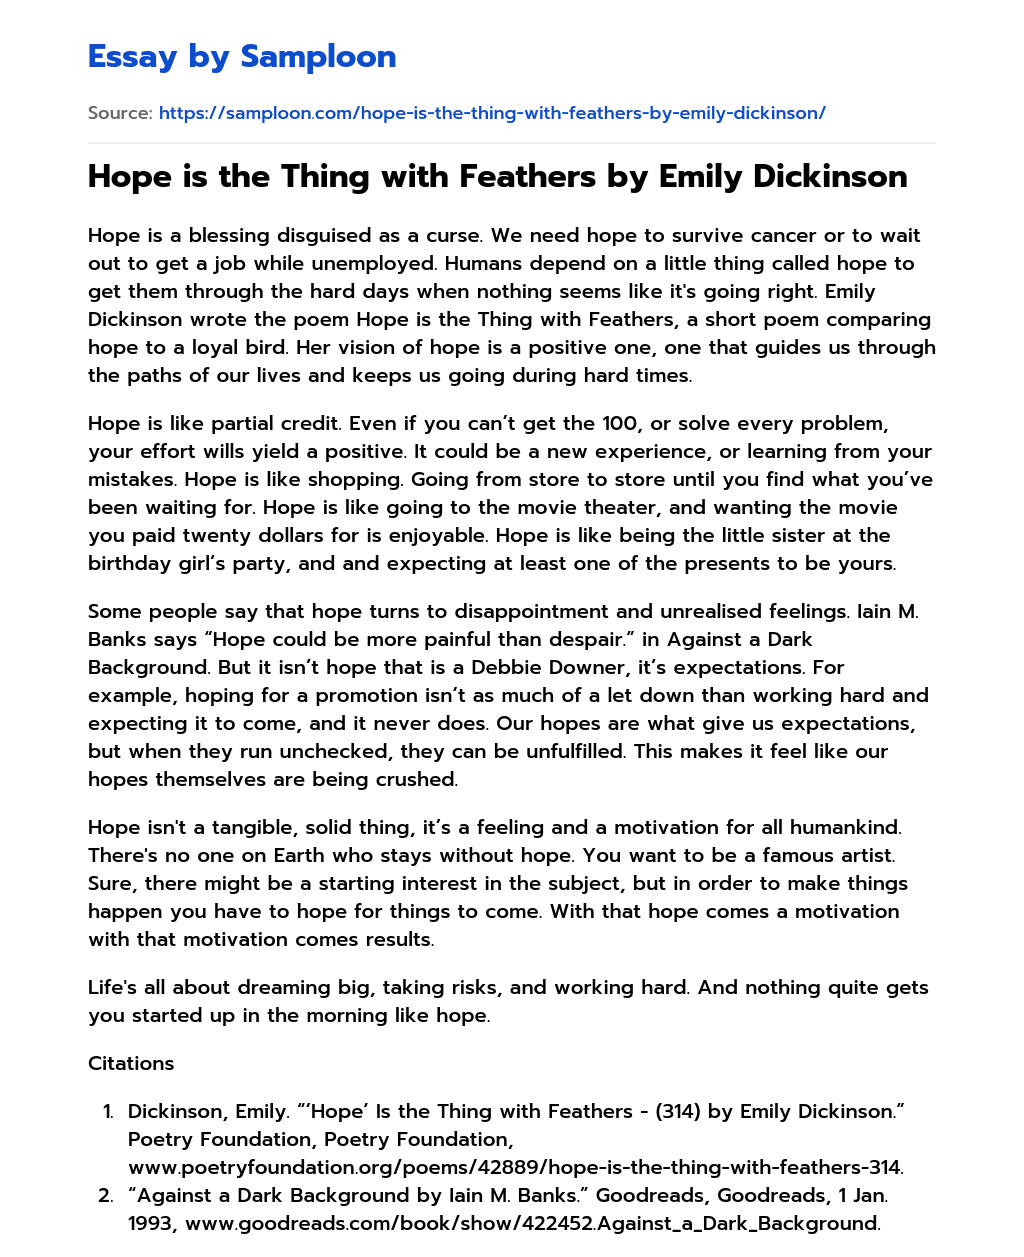 Hope is the Thing with Feathers by Emily Dickinson Summary essay